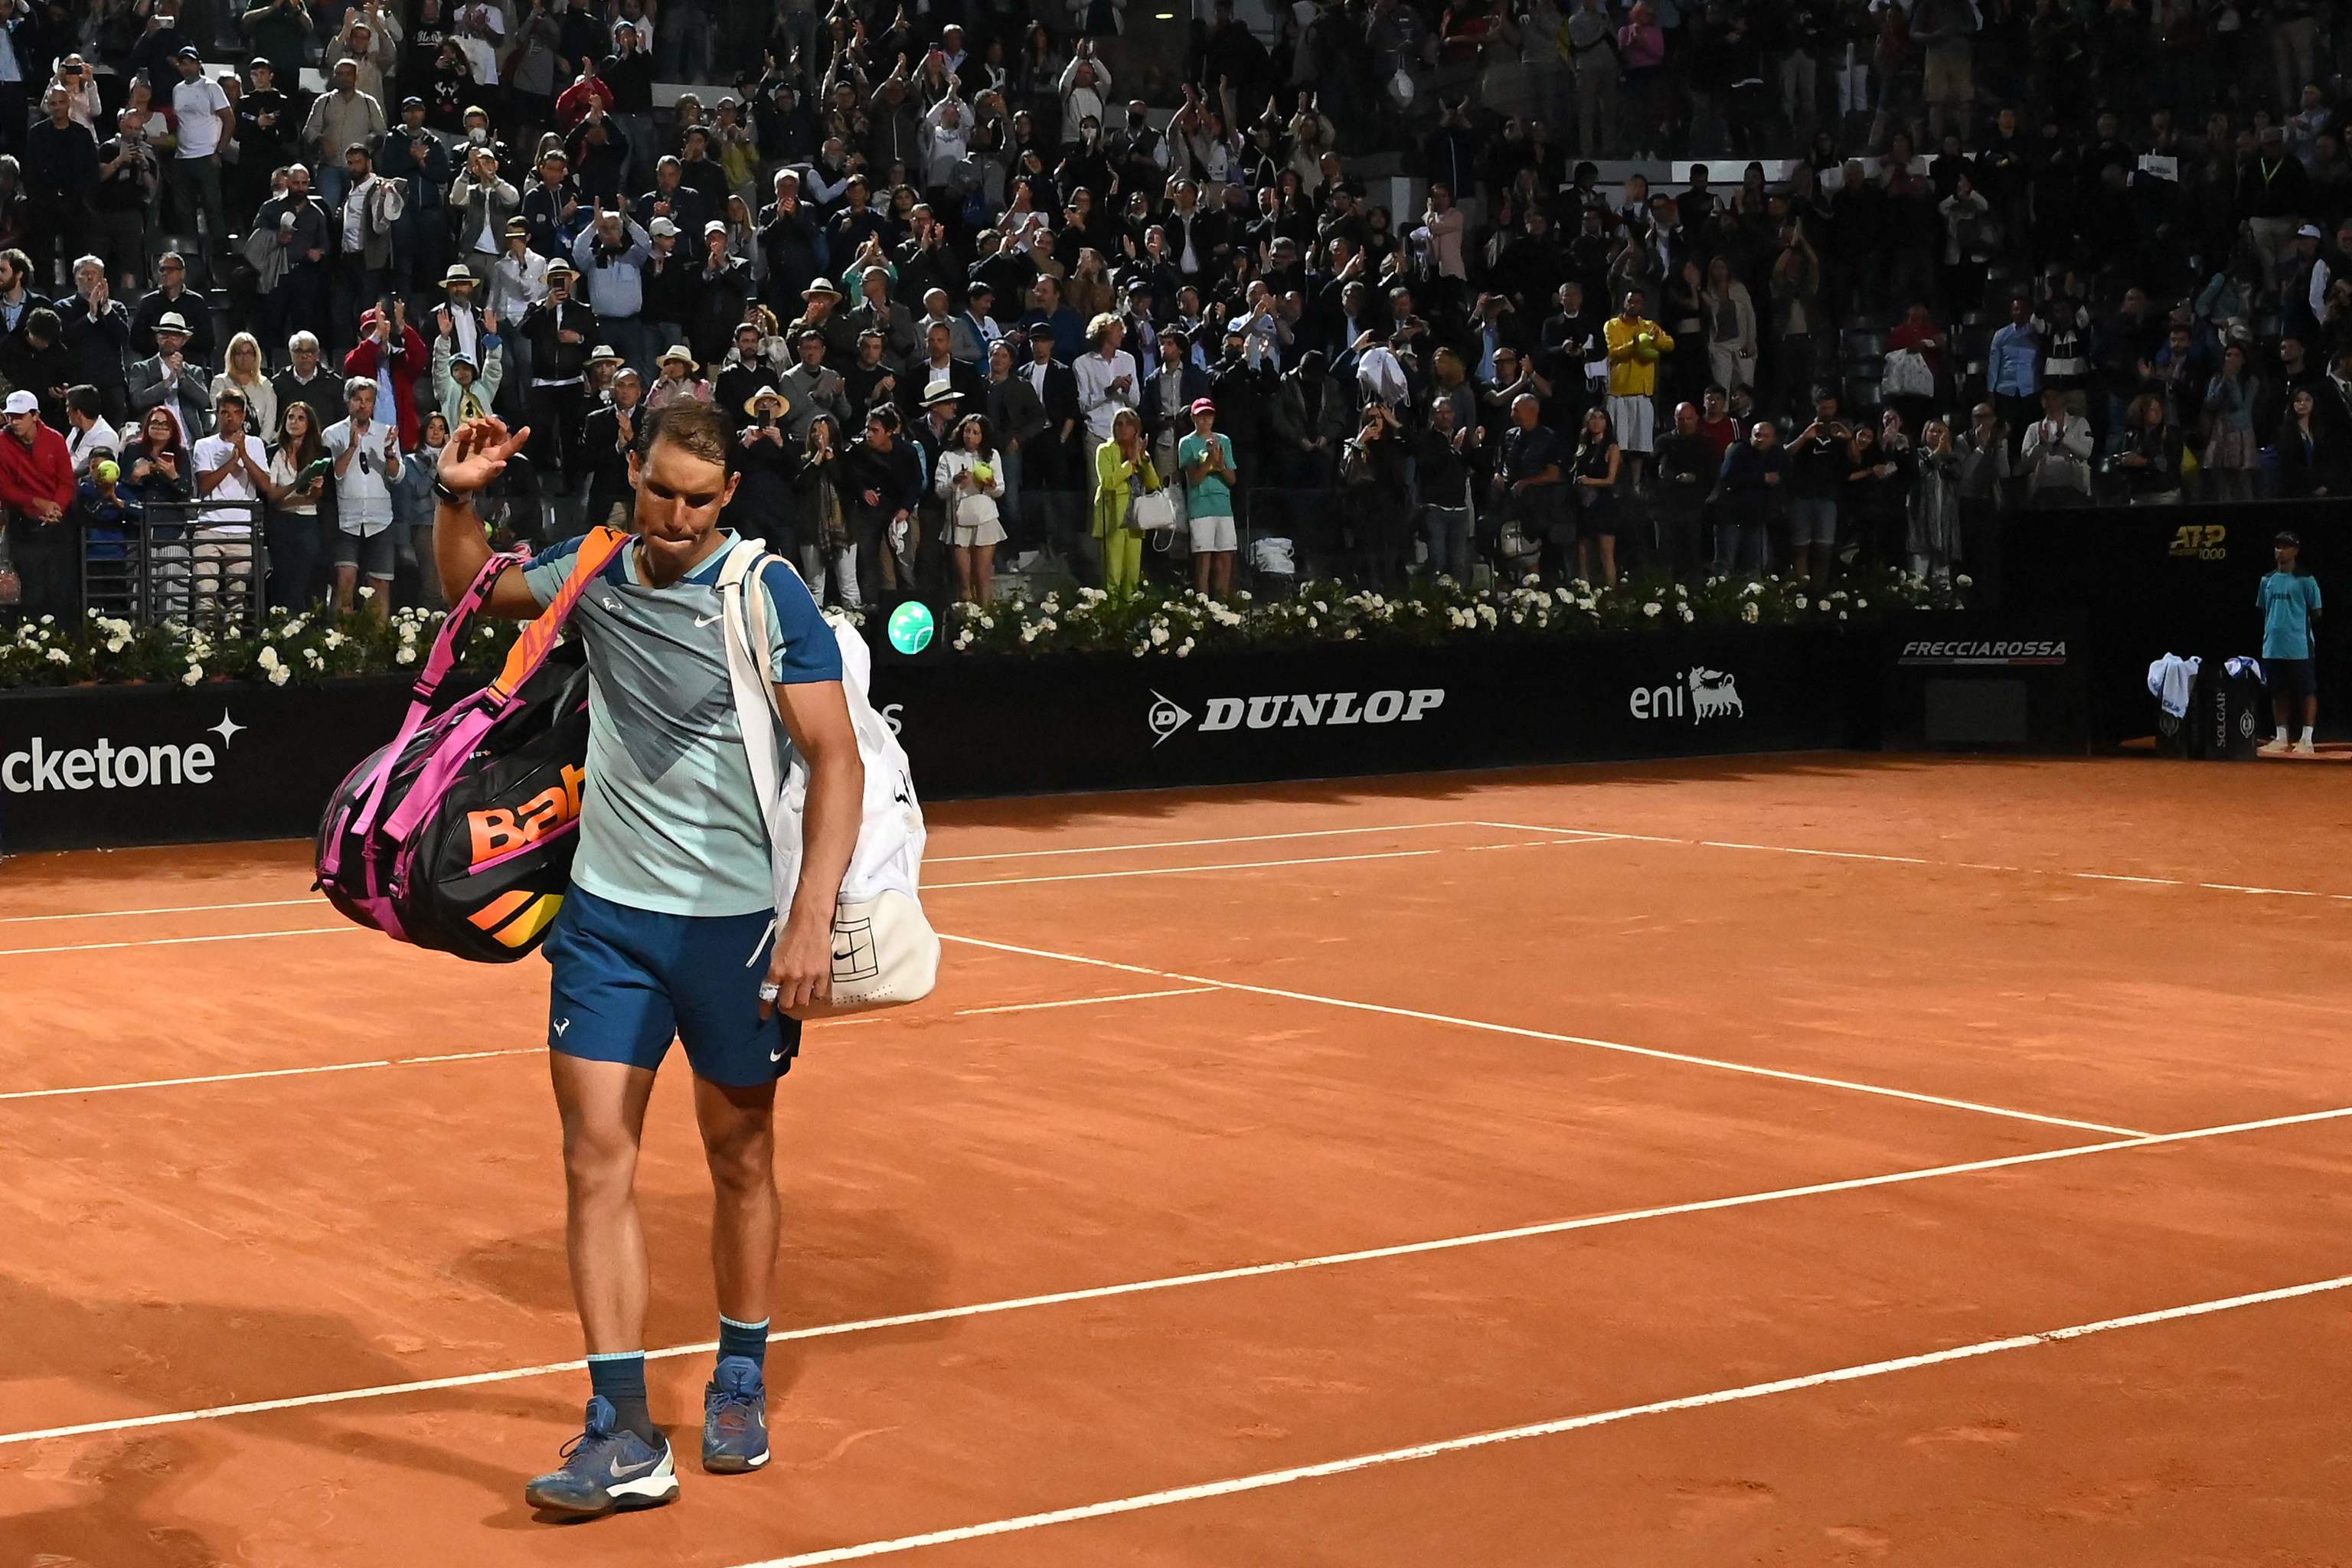 Nadal is disappointed after losing to Shapovalov in Rome on Thursday.